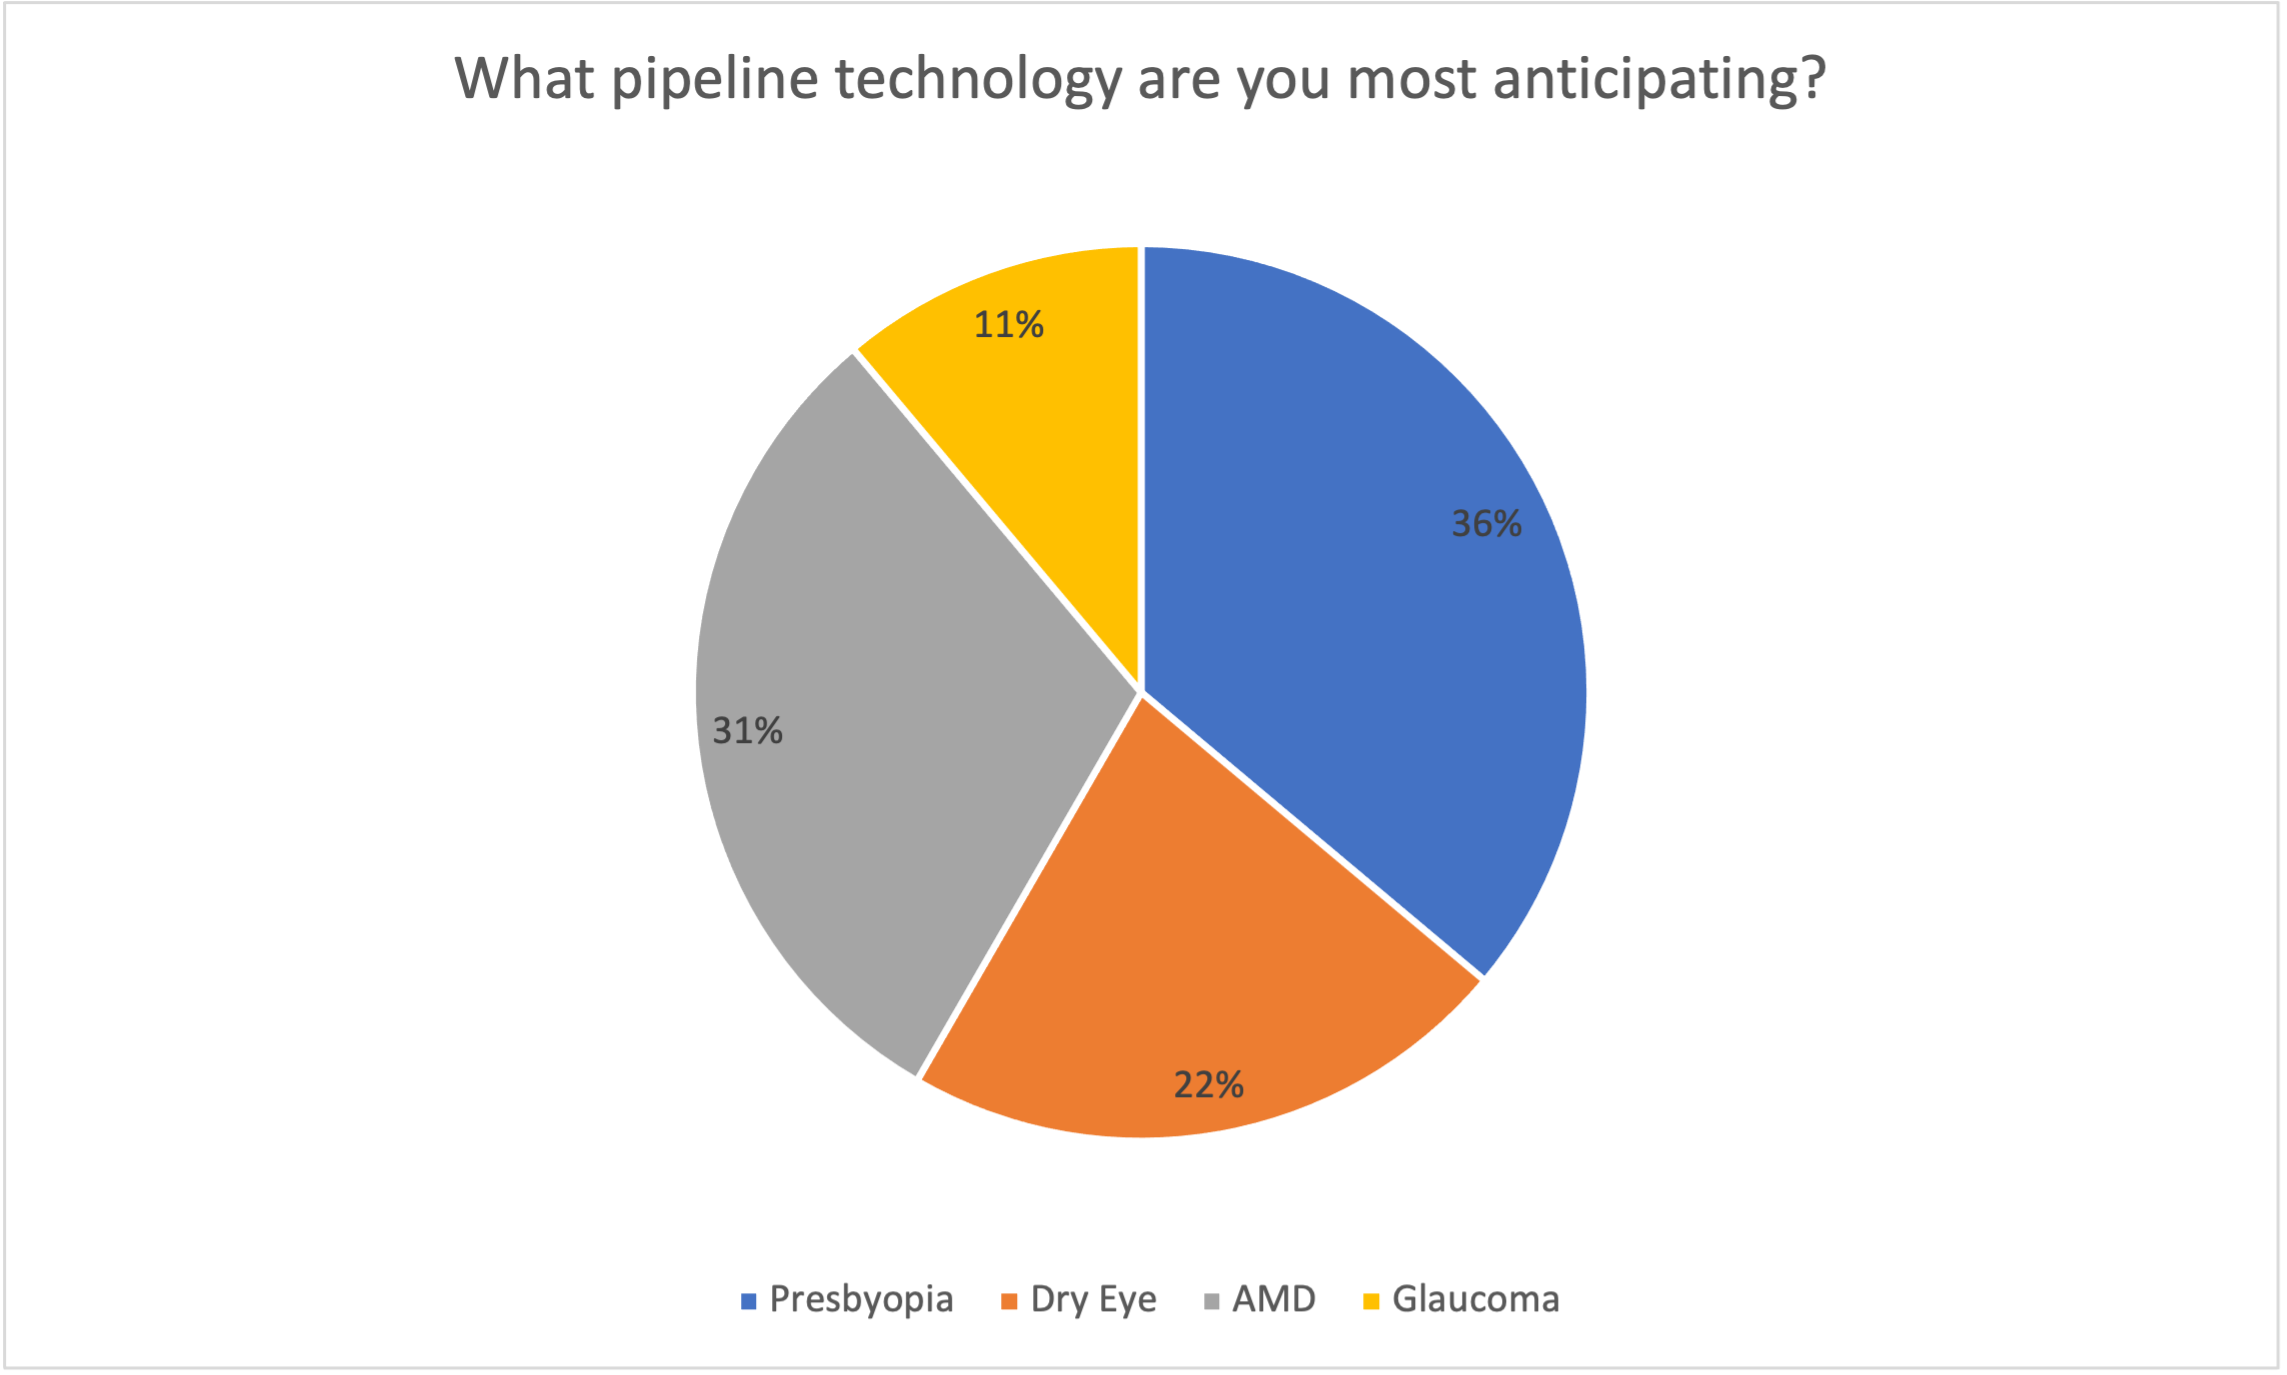 Poll results: What pipeline technology are you most anticipating?